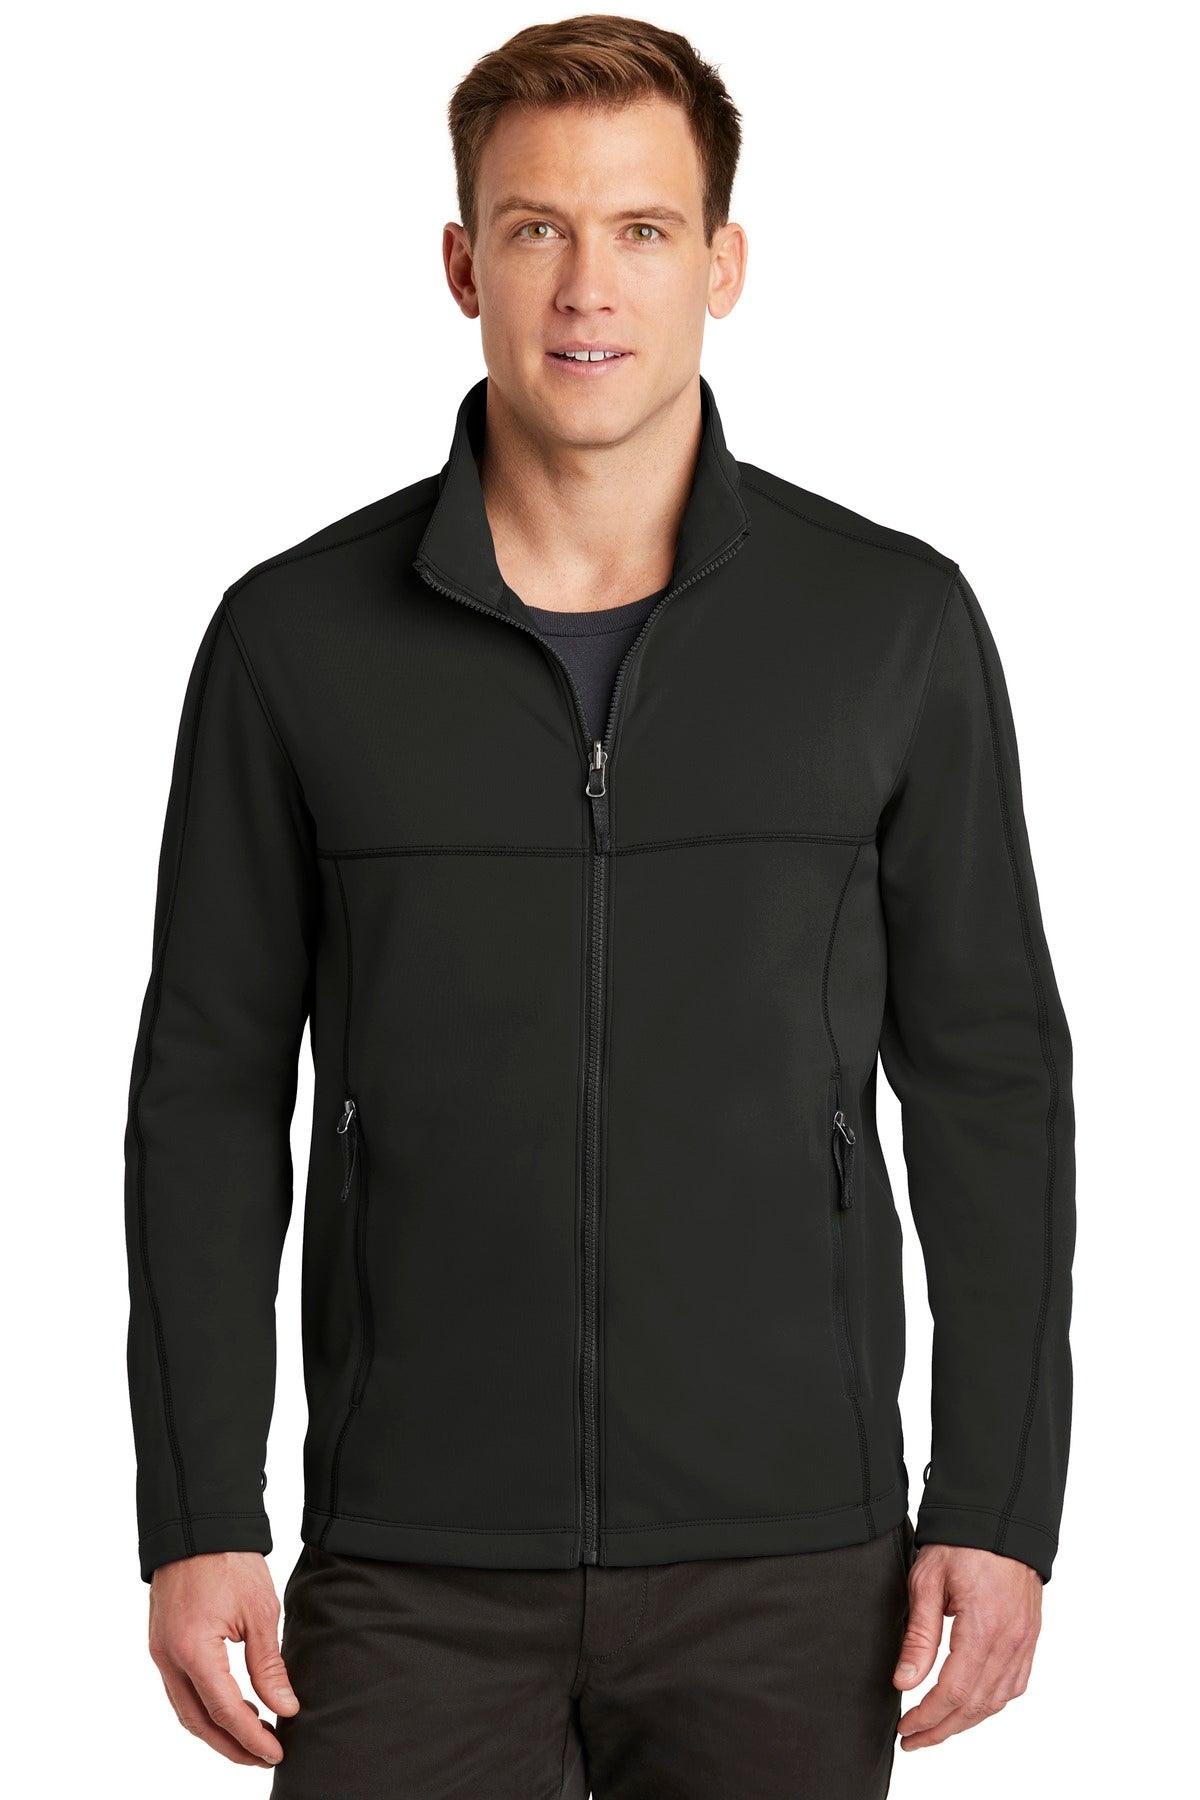 Port Authority Collective Smooth Fleece Jacket. F904 - Dresses Max